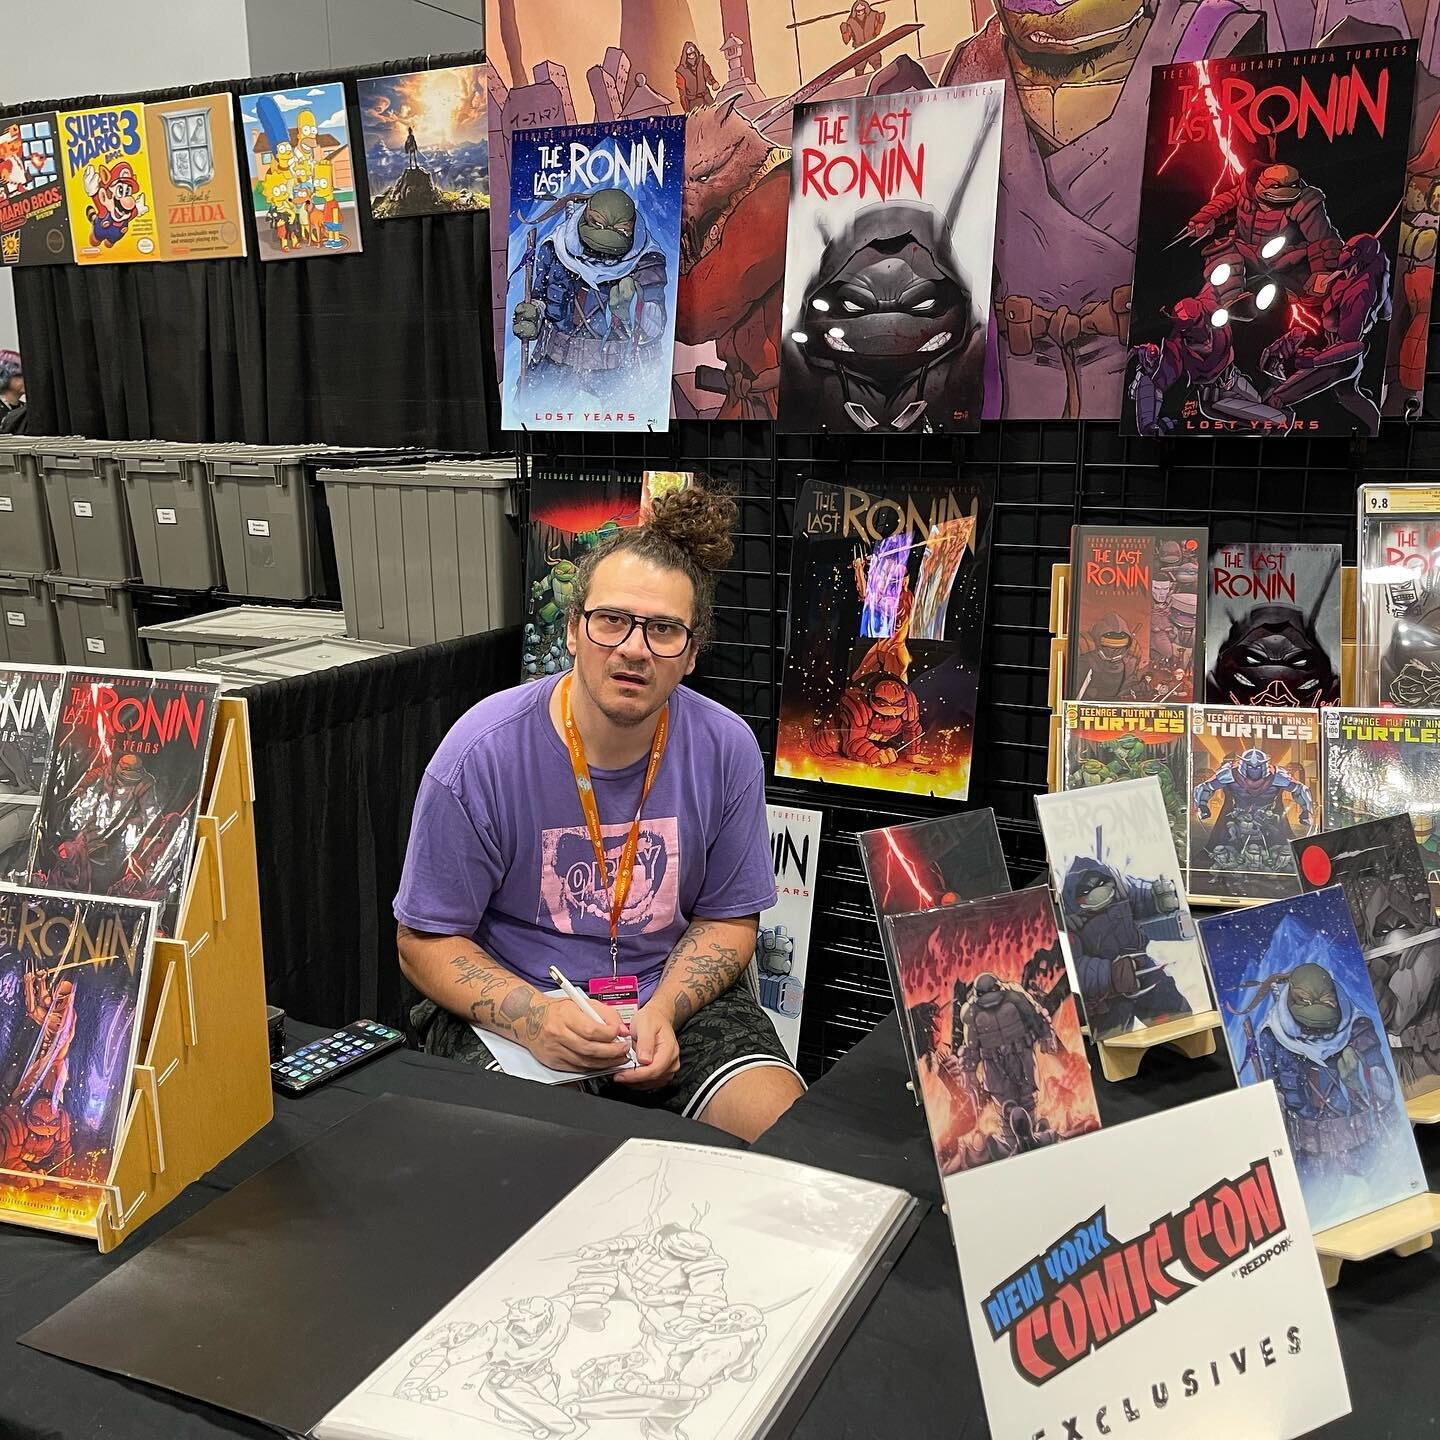 Hey NYCC, we&rsquo;ve got mr @noahmcnasty in the booth this weekend with some awesome exclusives. He&rsquo;s got books, original art, prints and more! Come check us out at booth 4256! #nycc